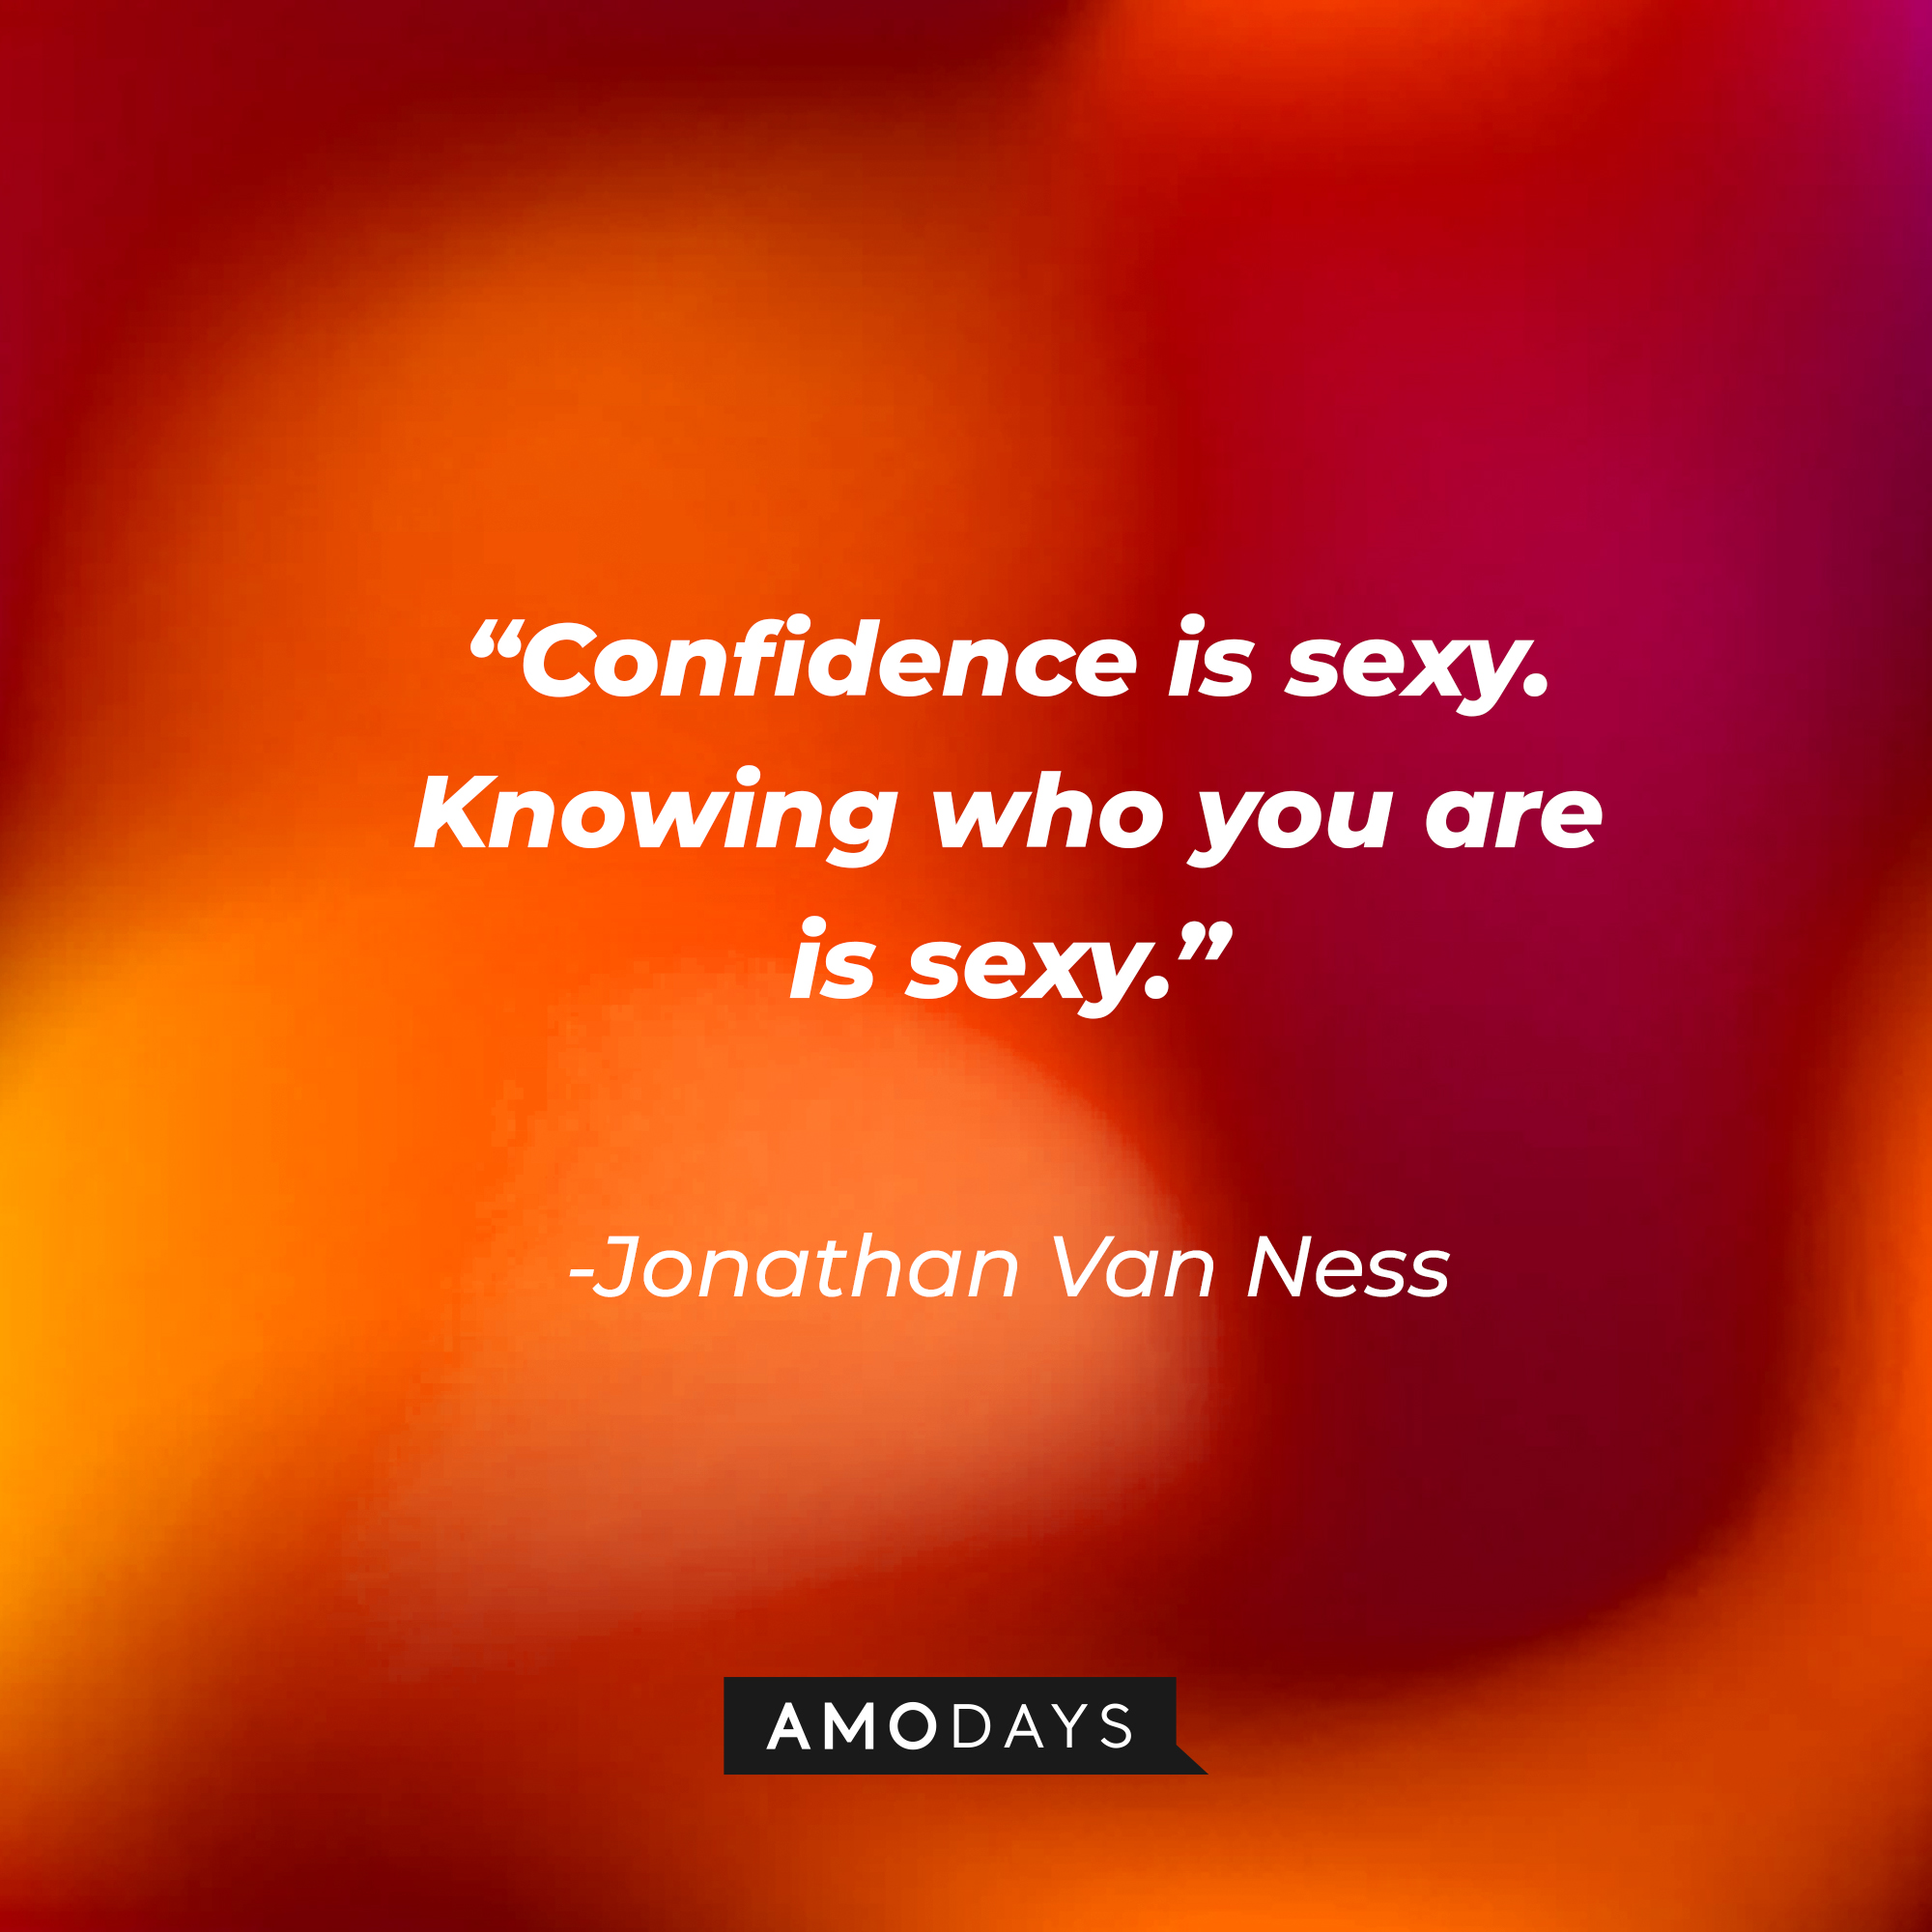 Jonathan Van Ness' quote: "Confidence is sexy. Knowing who you are is sexy." | Source: Getty Images